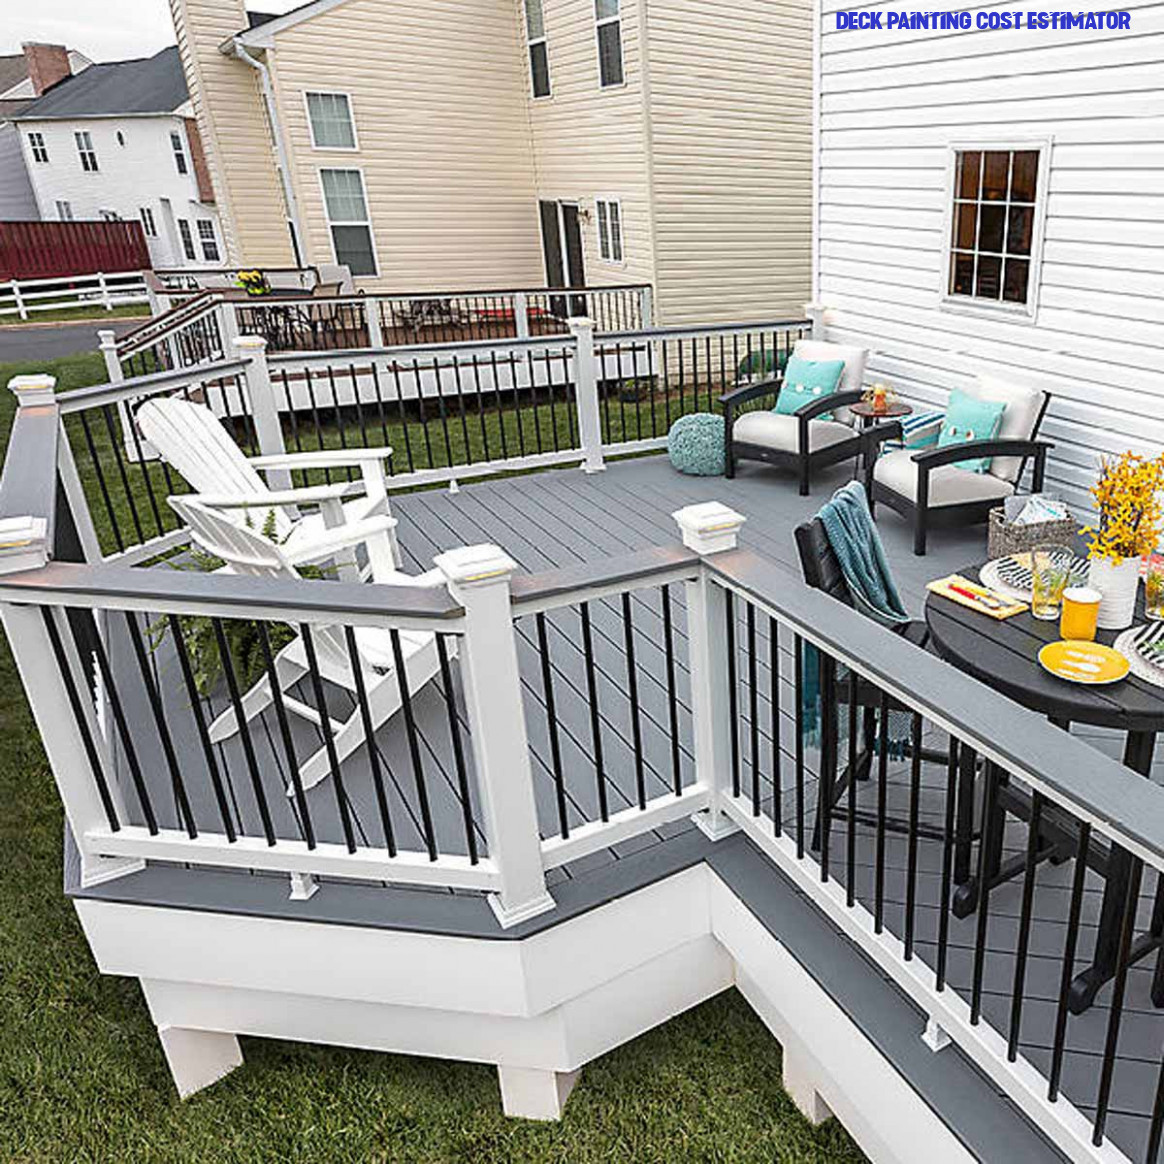 Deck Paint Cost
 Five New Thoughts About Deck Painting Cost Estimator That